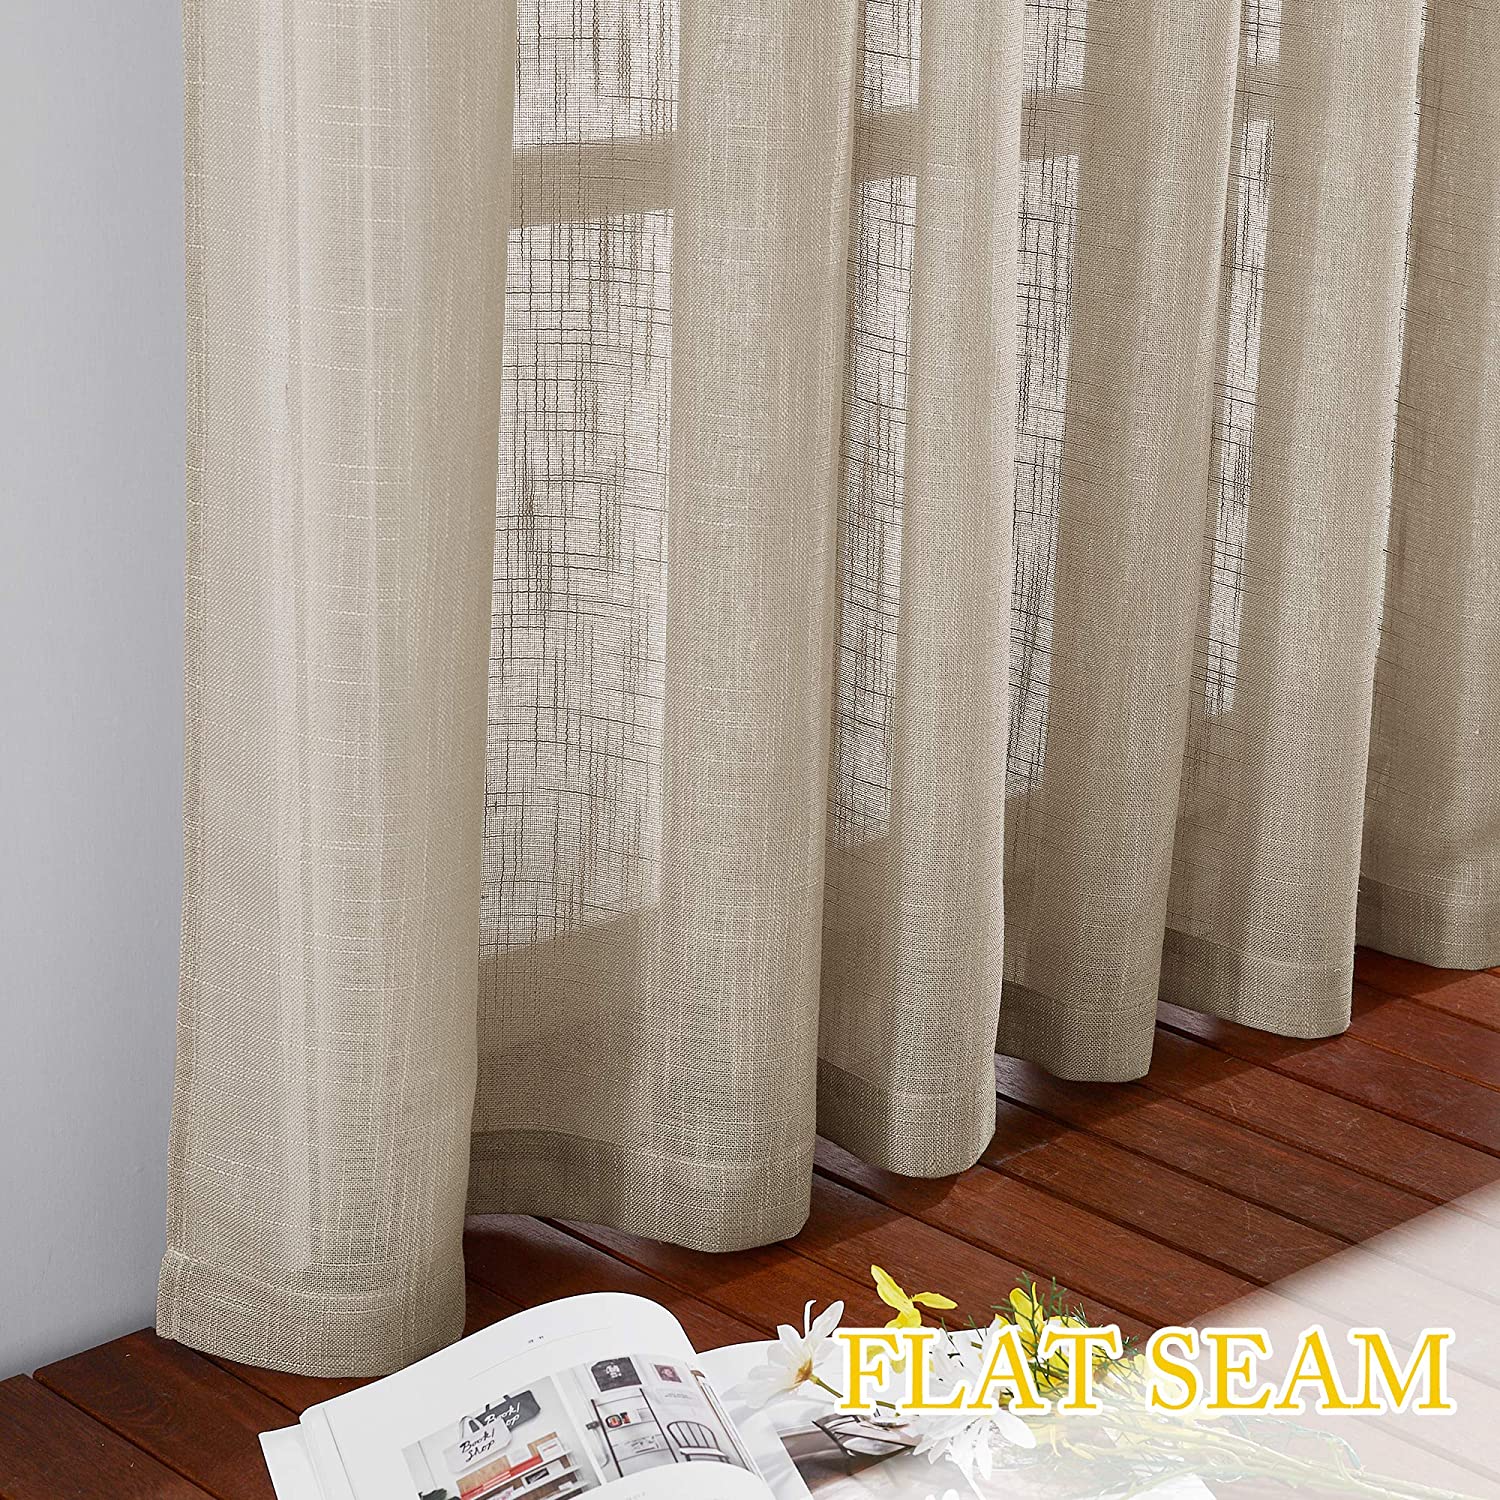 1 Pair 52 Inches Wide Grommet Top Privacy Bedroom Linen Semi Sheer Curtains KGORGE Store